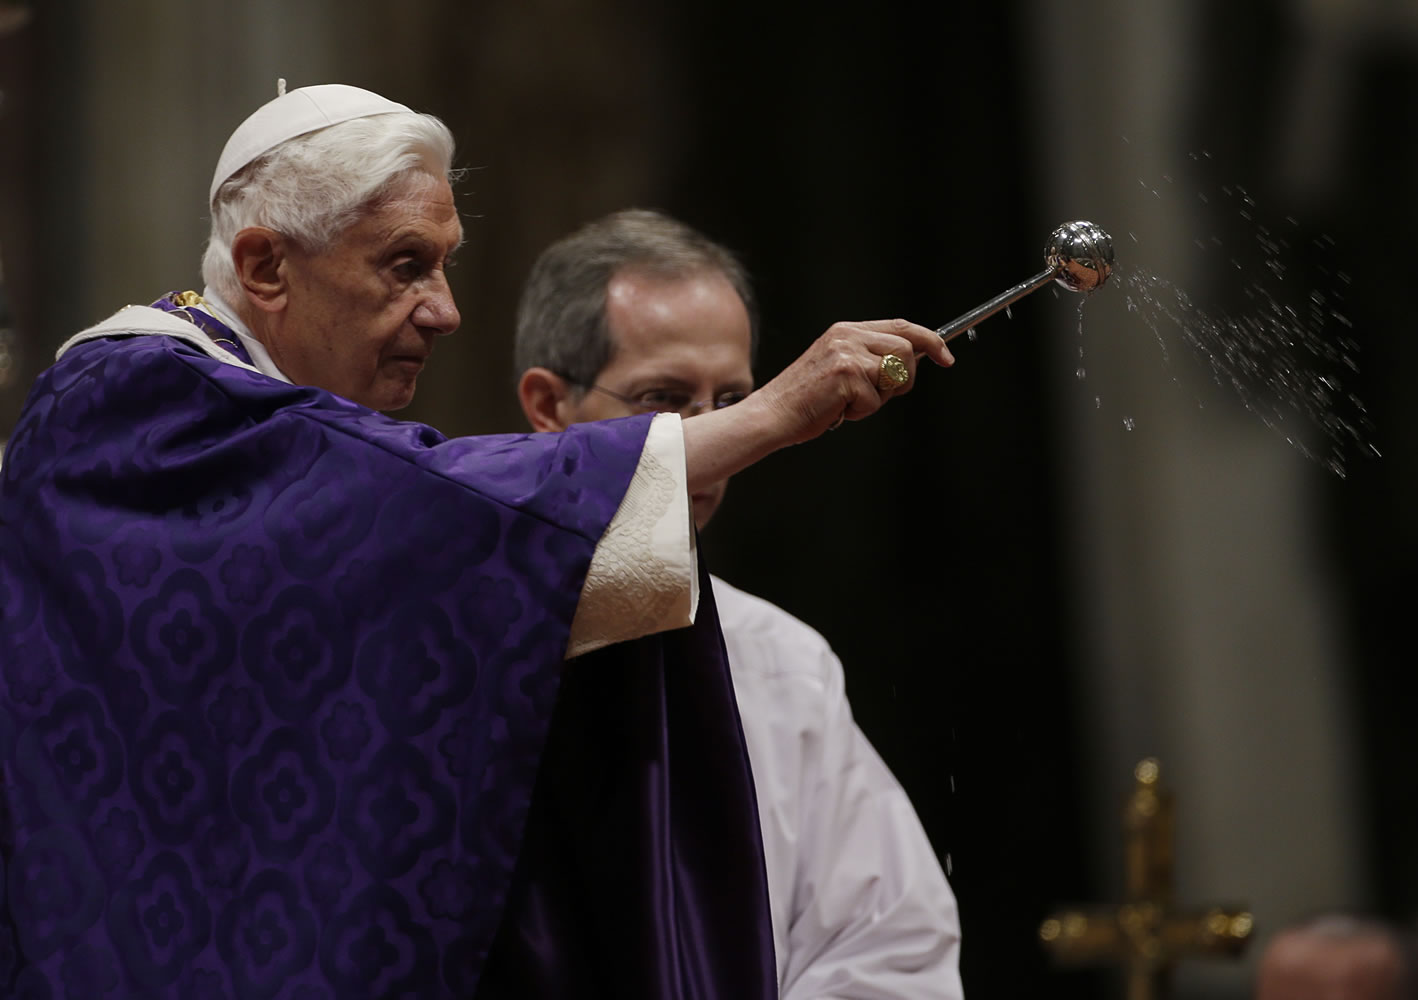 Pope Benedict XVI blesses the ashes as he celebrates the Ash Wednesday mass in St. Peter's Basilica at the Vatican, Wednesday, Feb. 13, 2013.  Ash Wednesday marks the beginning of Lent, a solemn period of 40 days of prayer and self-denial leading up to Easter. Pope Benedict XVI told thousands of faithful Wednesday that he was resigning for &quot;the good of the church&quot;, an extraordinary scene of a pope explaining himself to his flock that unfolded in his first appearance since dropping the bombshell announcement.